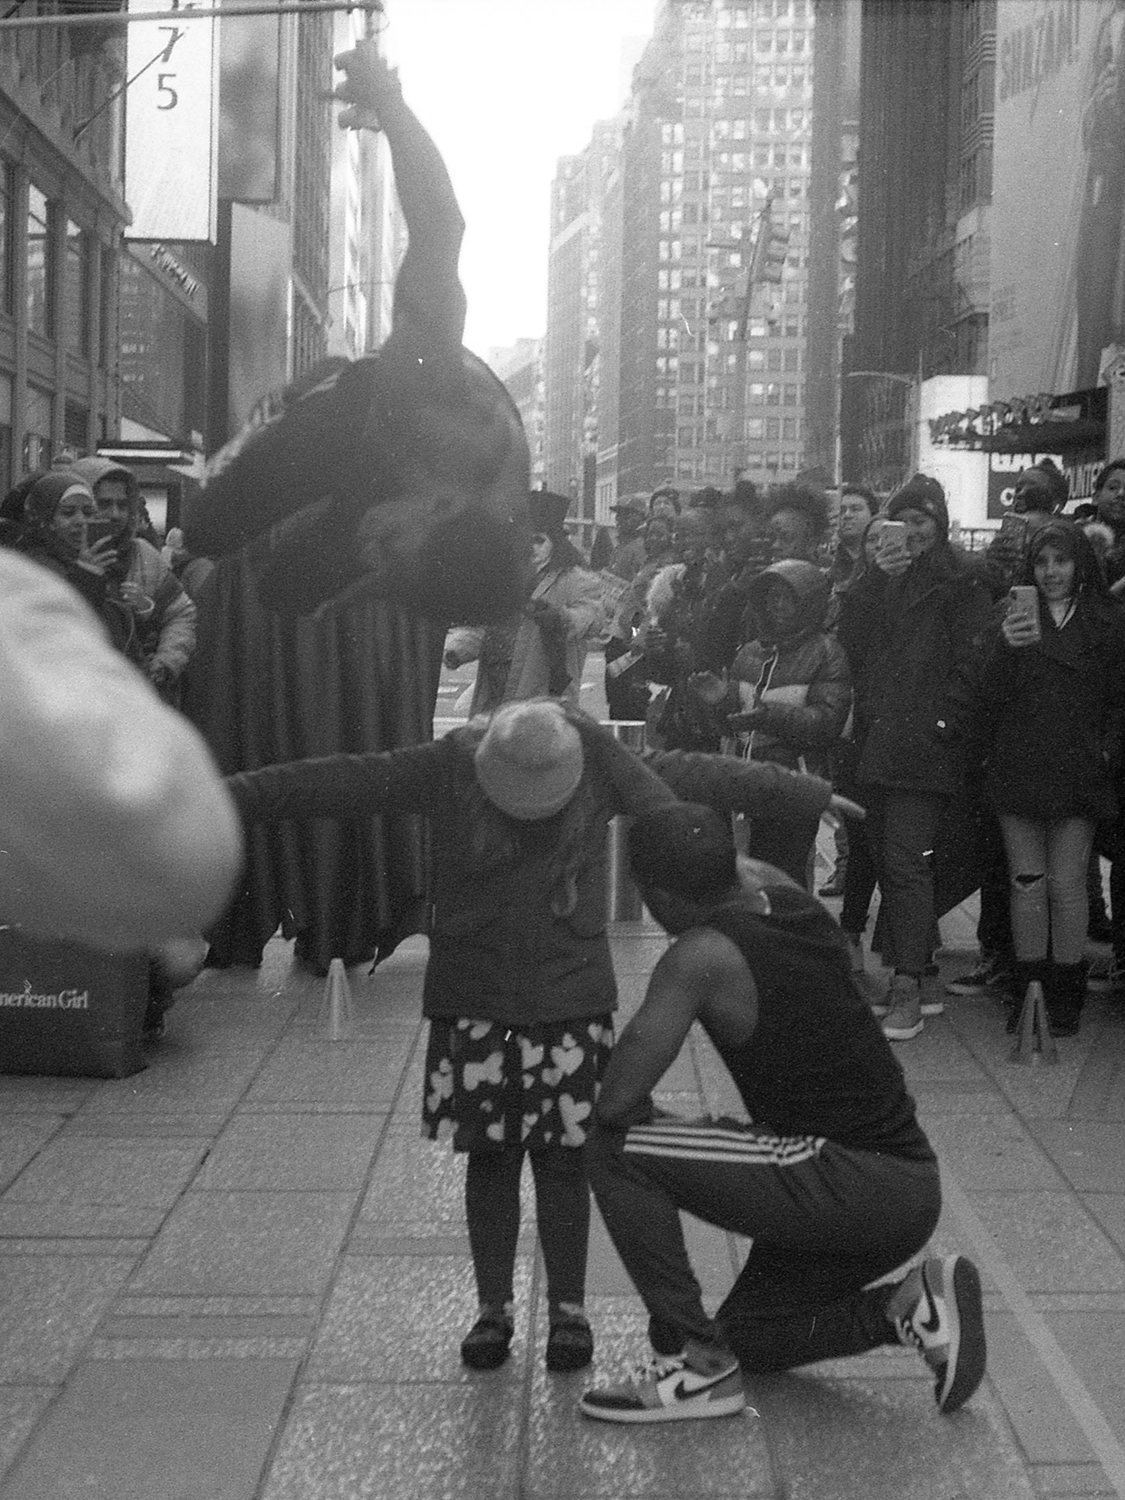 Picture of me street performers in Times Square